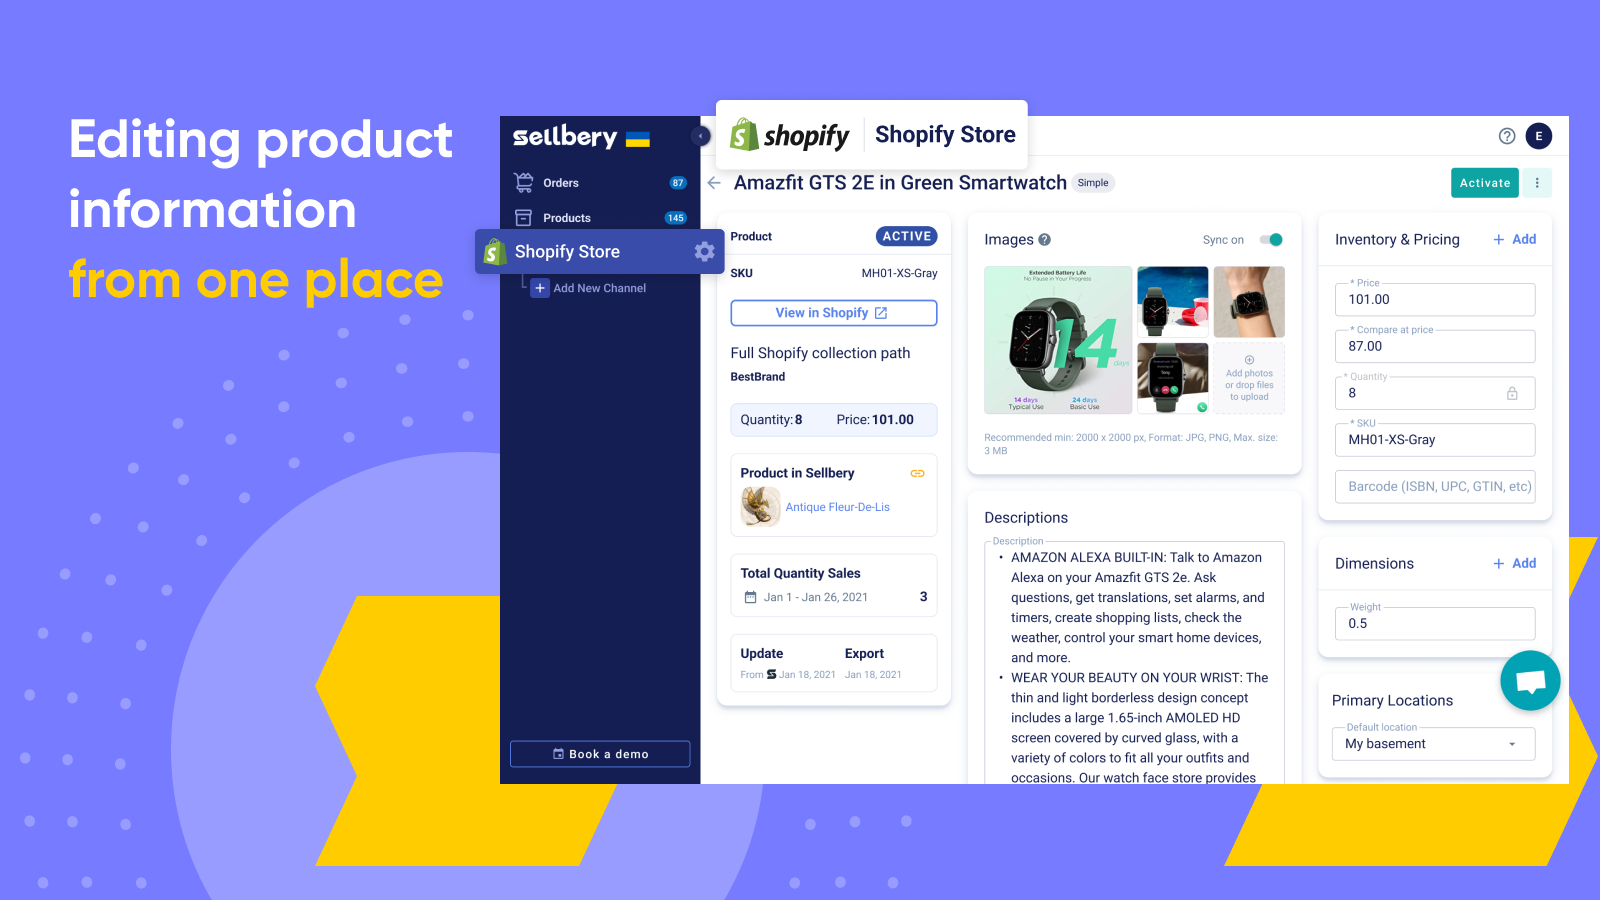 Editing product information in Products under Shopify